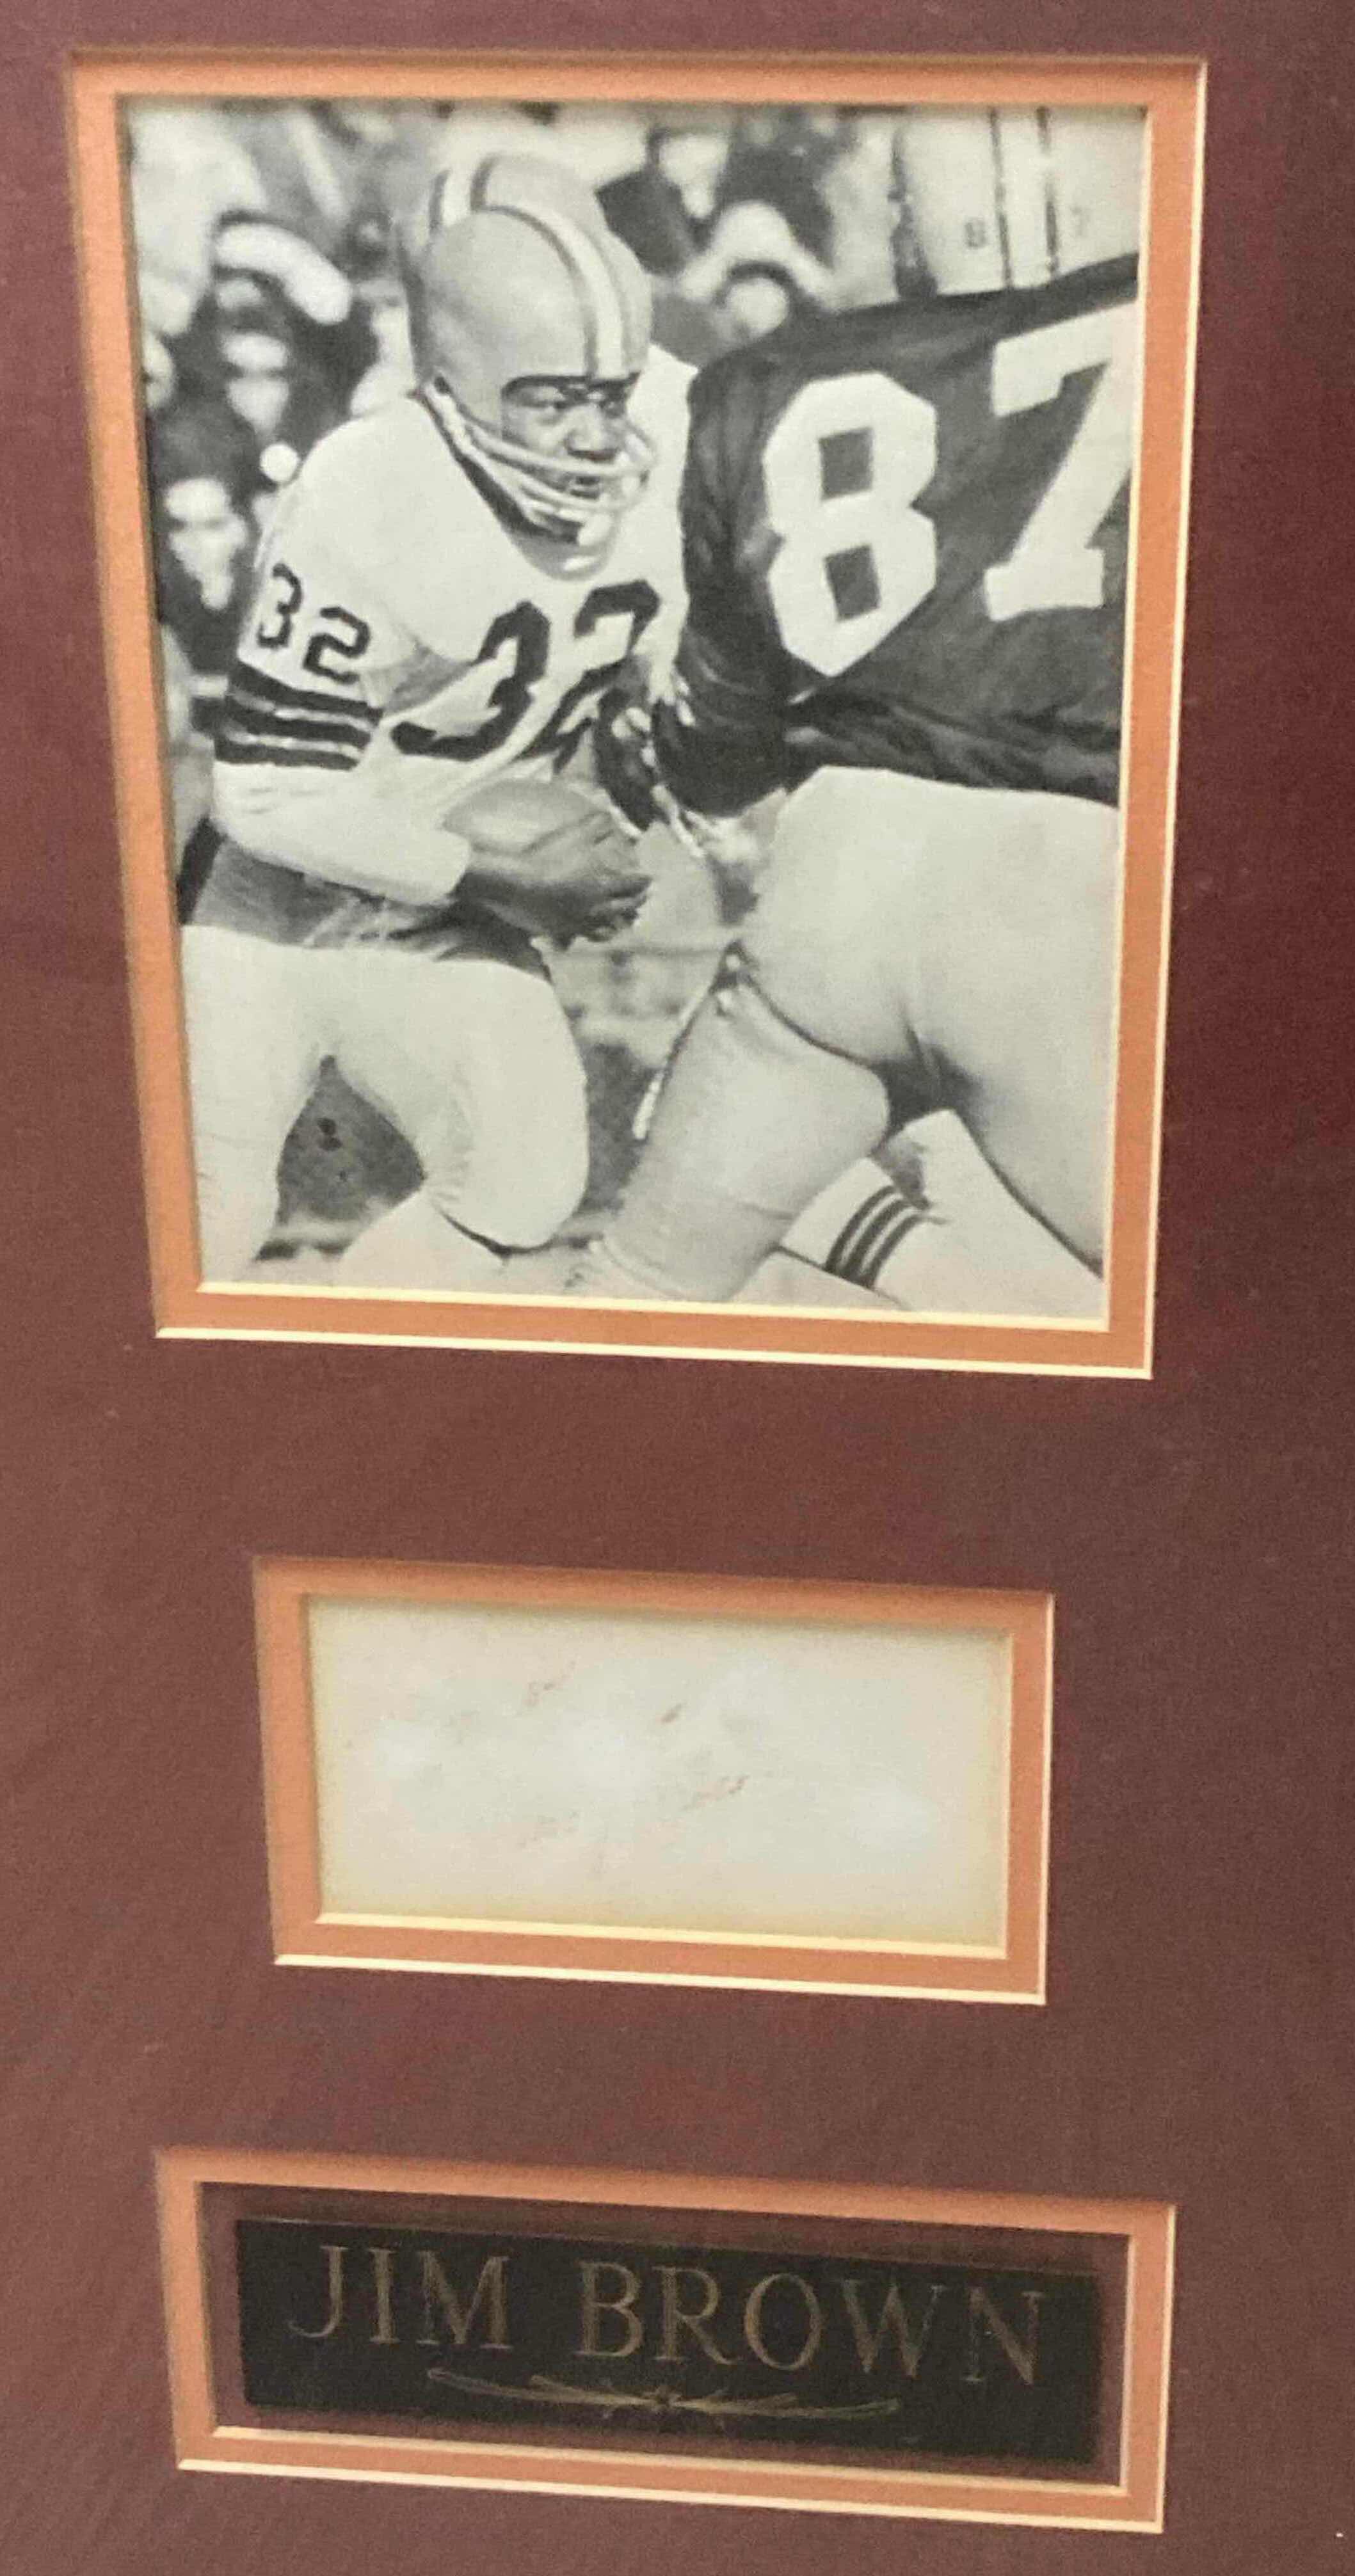 Photo 2 of JIM BROWN FRAMED PHOTOGRAPH AUTOGRAPHED INDEX CARD BY JIM BROWN NO COA 19.5” X 13.5”